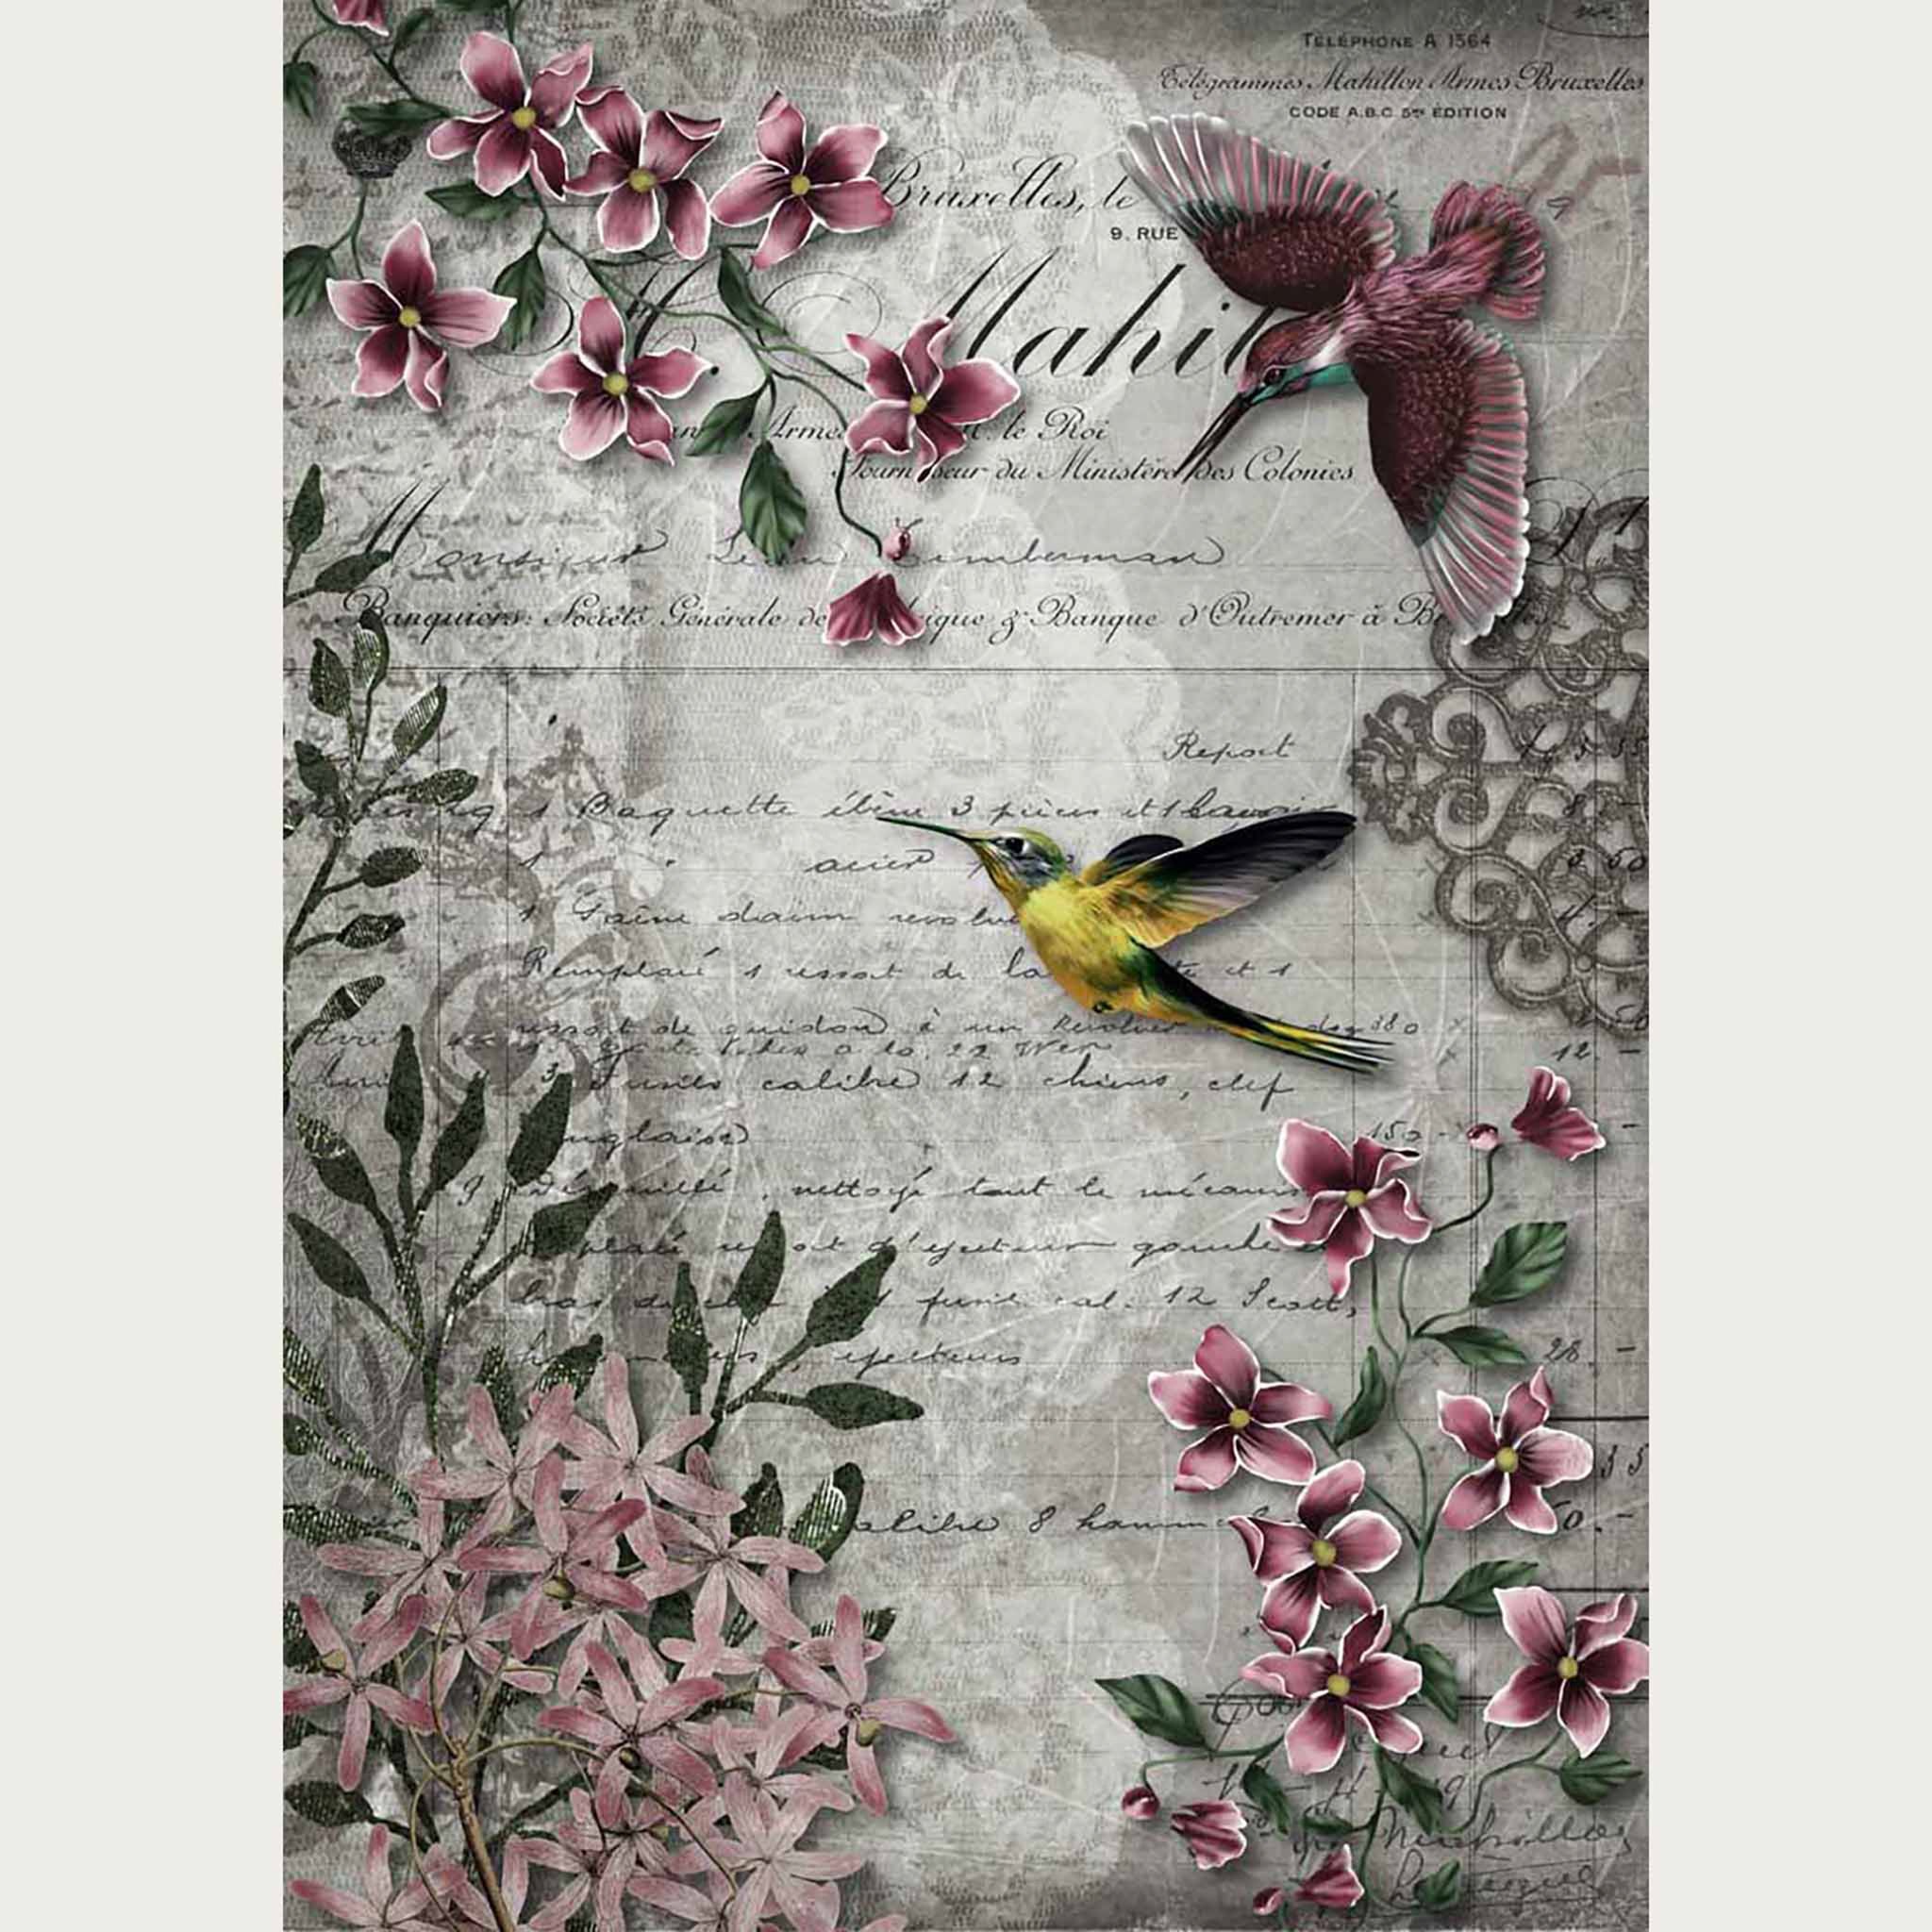 A3 rice paper design featuring a beautiful combination of hummingbirds, flowers, and scrollwork against a light gray script letter. White borders are on the sides.